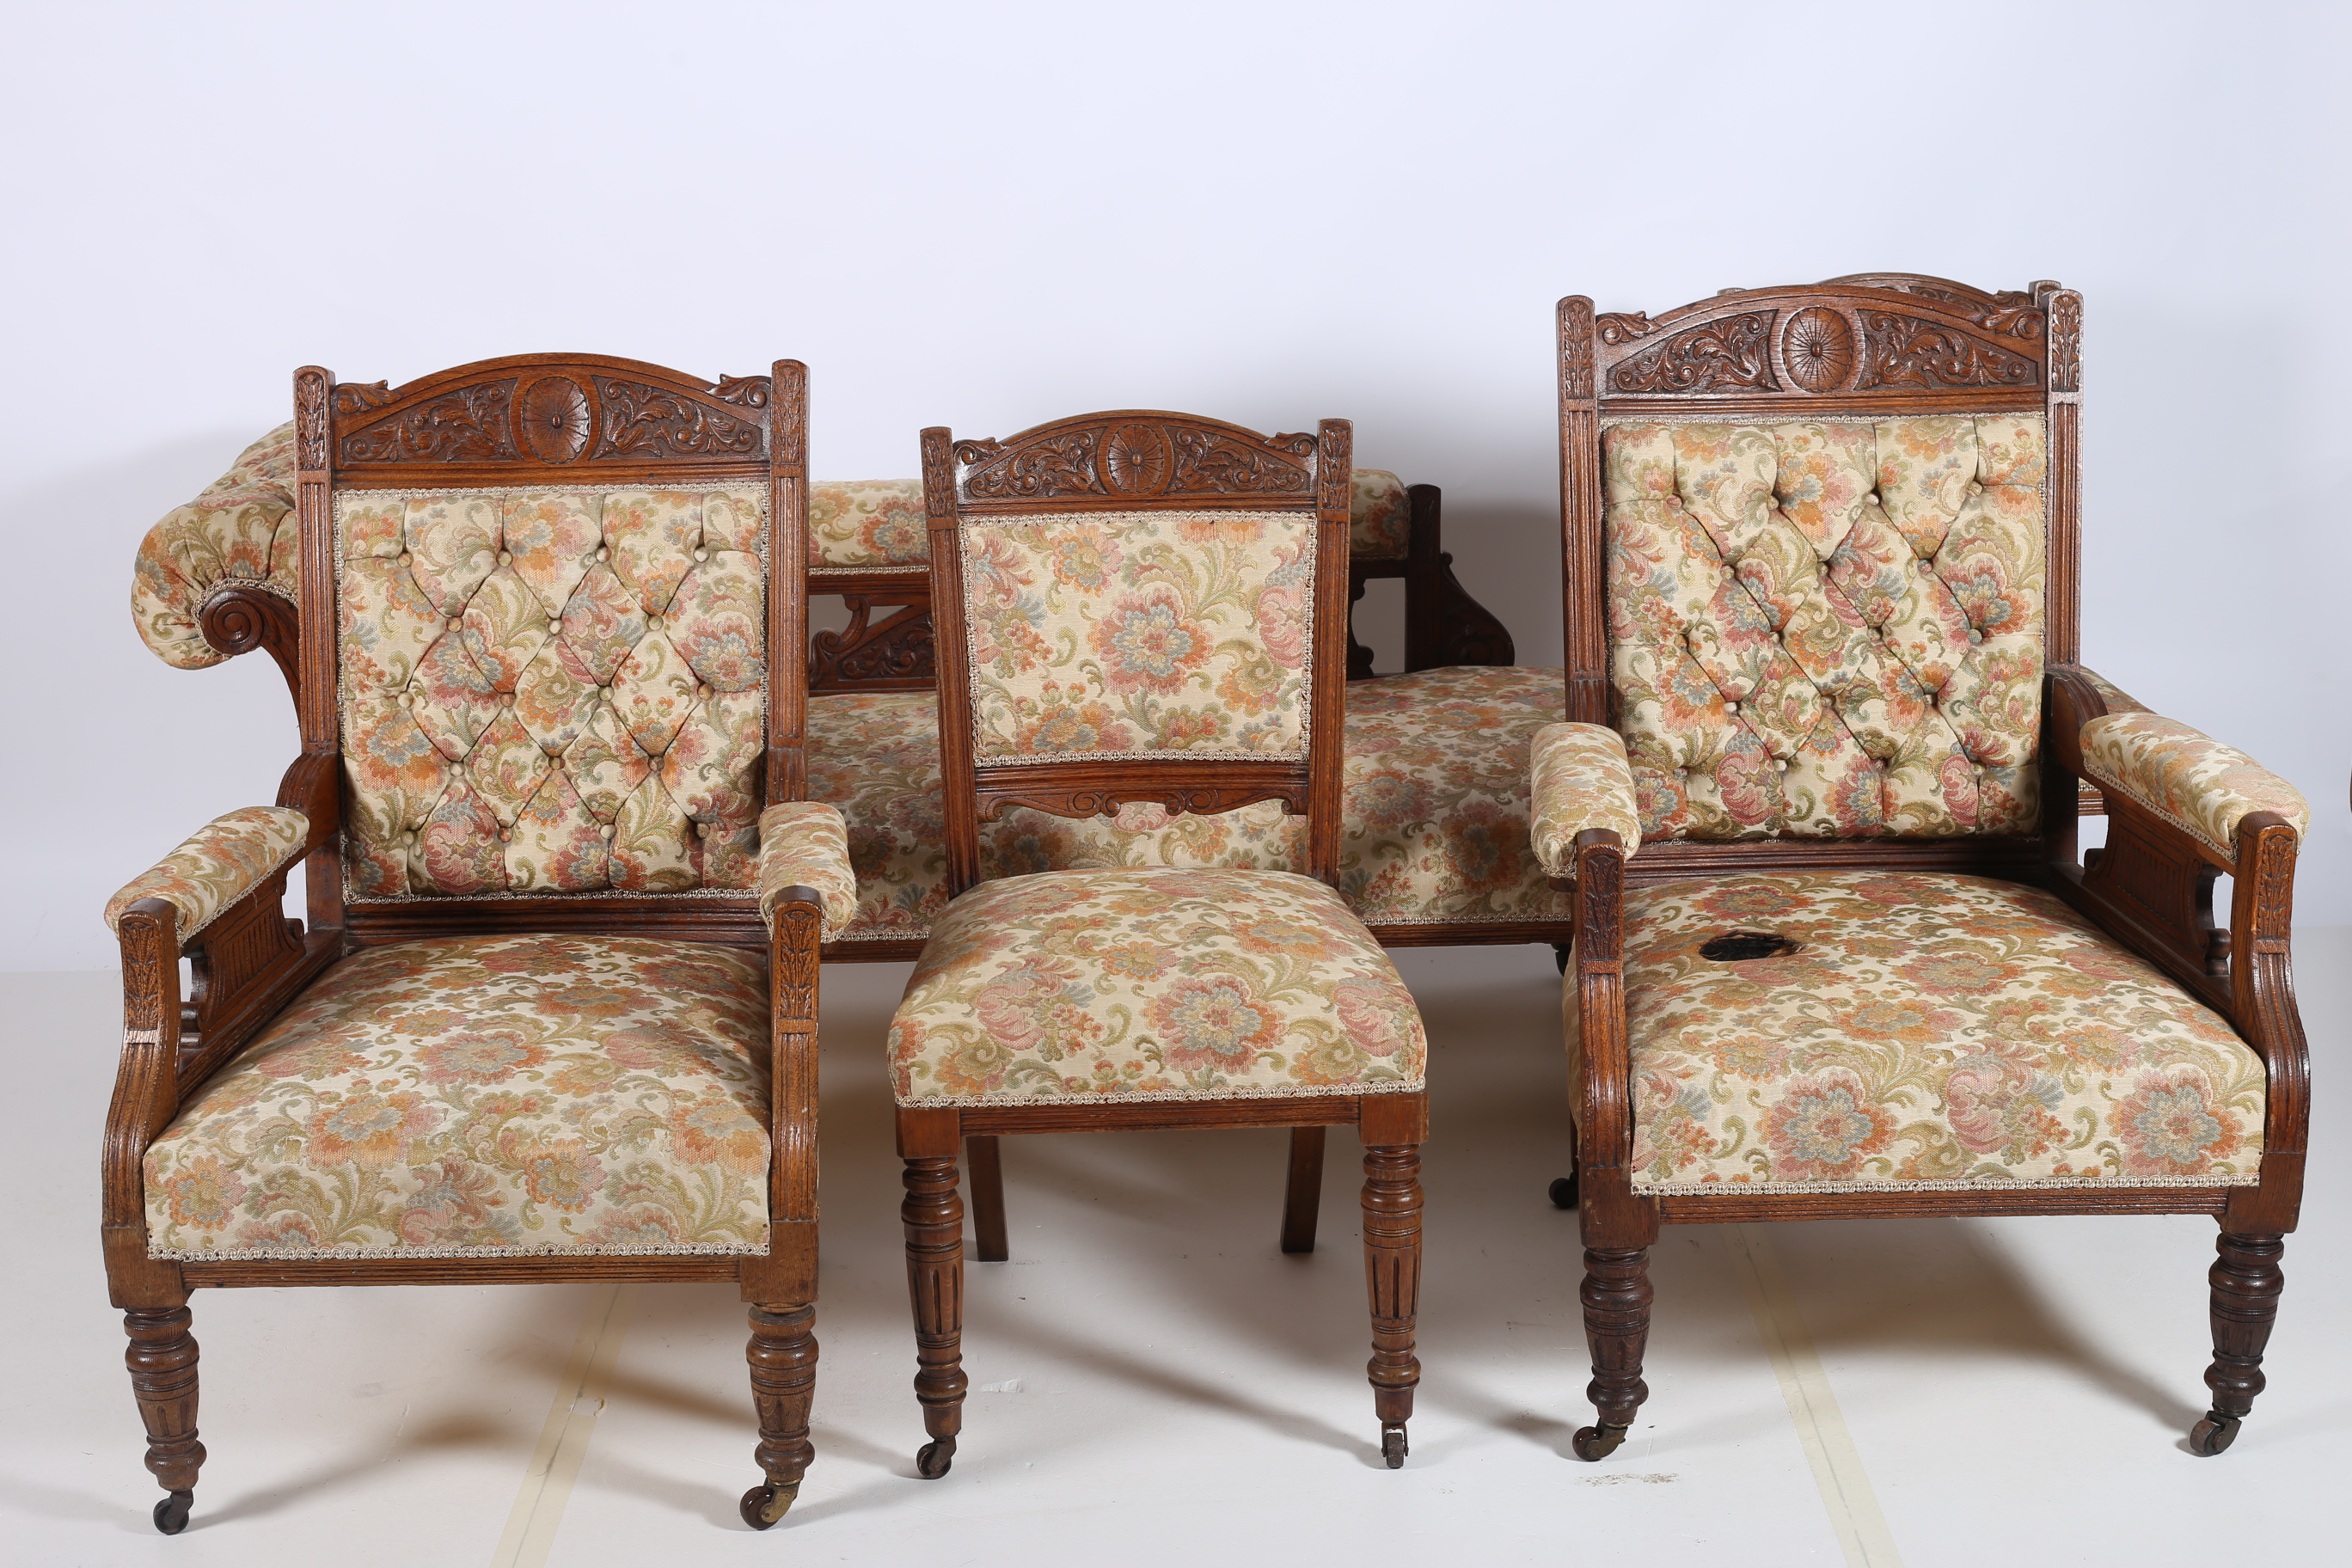 AN EDWARDIAN CARVED OAK AND UPHOLSTERED SEVEN PIECE DRAWING ROOM SUITE comprising set of four